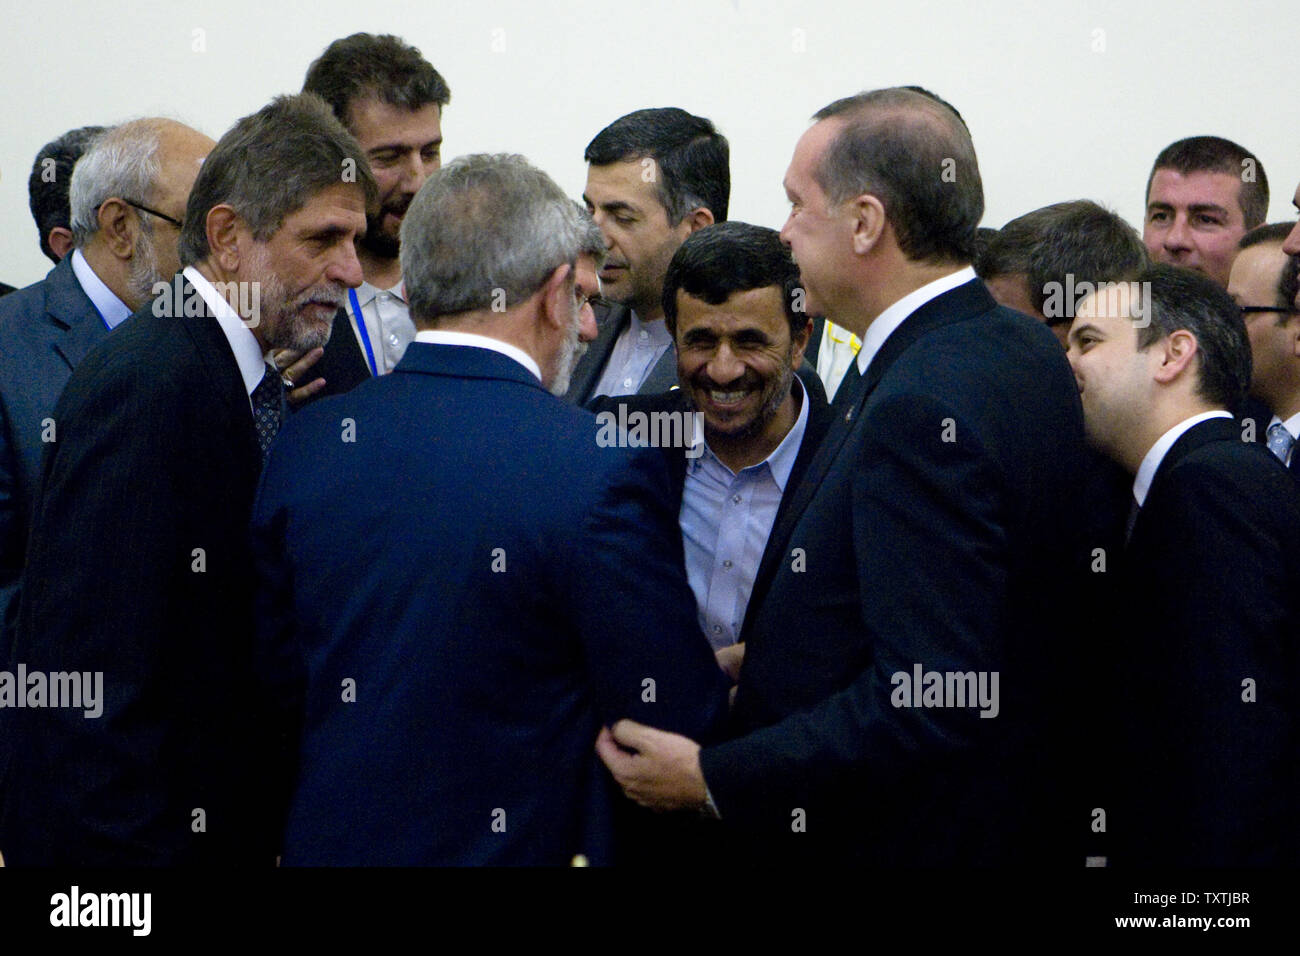 Iranian President Mahmoud Ahmadinejad (C) and Turkish and Brazilian counterparts celebrate after the three countries signed an agreement to ship Iran's low-enriched uranium to Turkey in exchange for fuel for a nuclear reactor in Tehran, Iran, on May 17, 2010. Iran signed an agreement to swap its uranium in Turkey for enrichment, hoping to avert new international sanctions. Brazil helped broker the deal.     UPI/Maryam Rahmanian Stock Photo